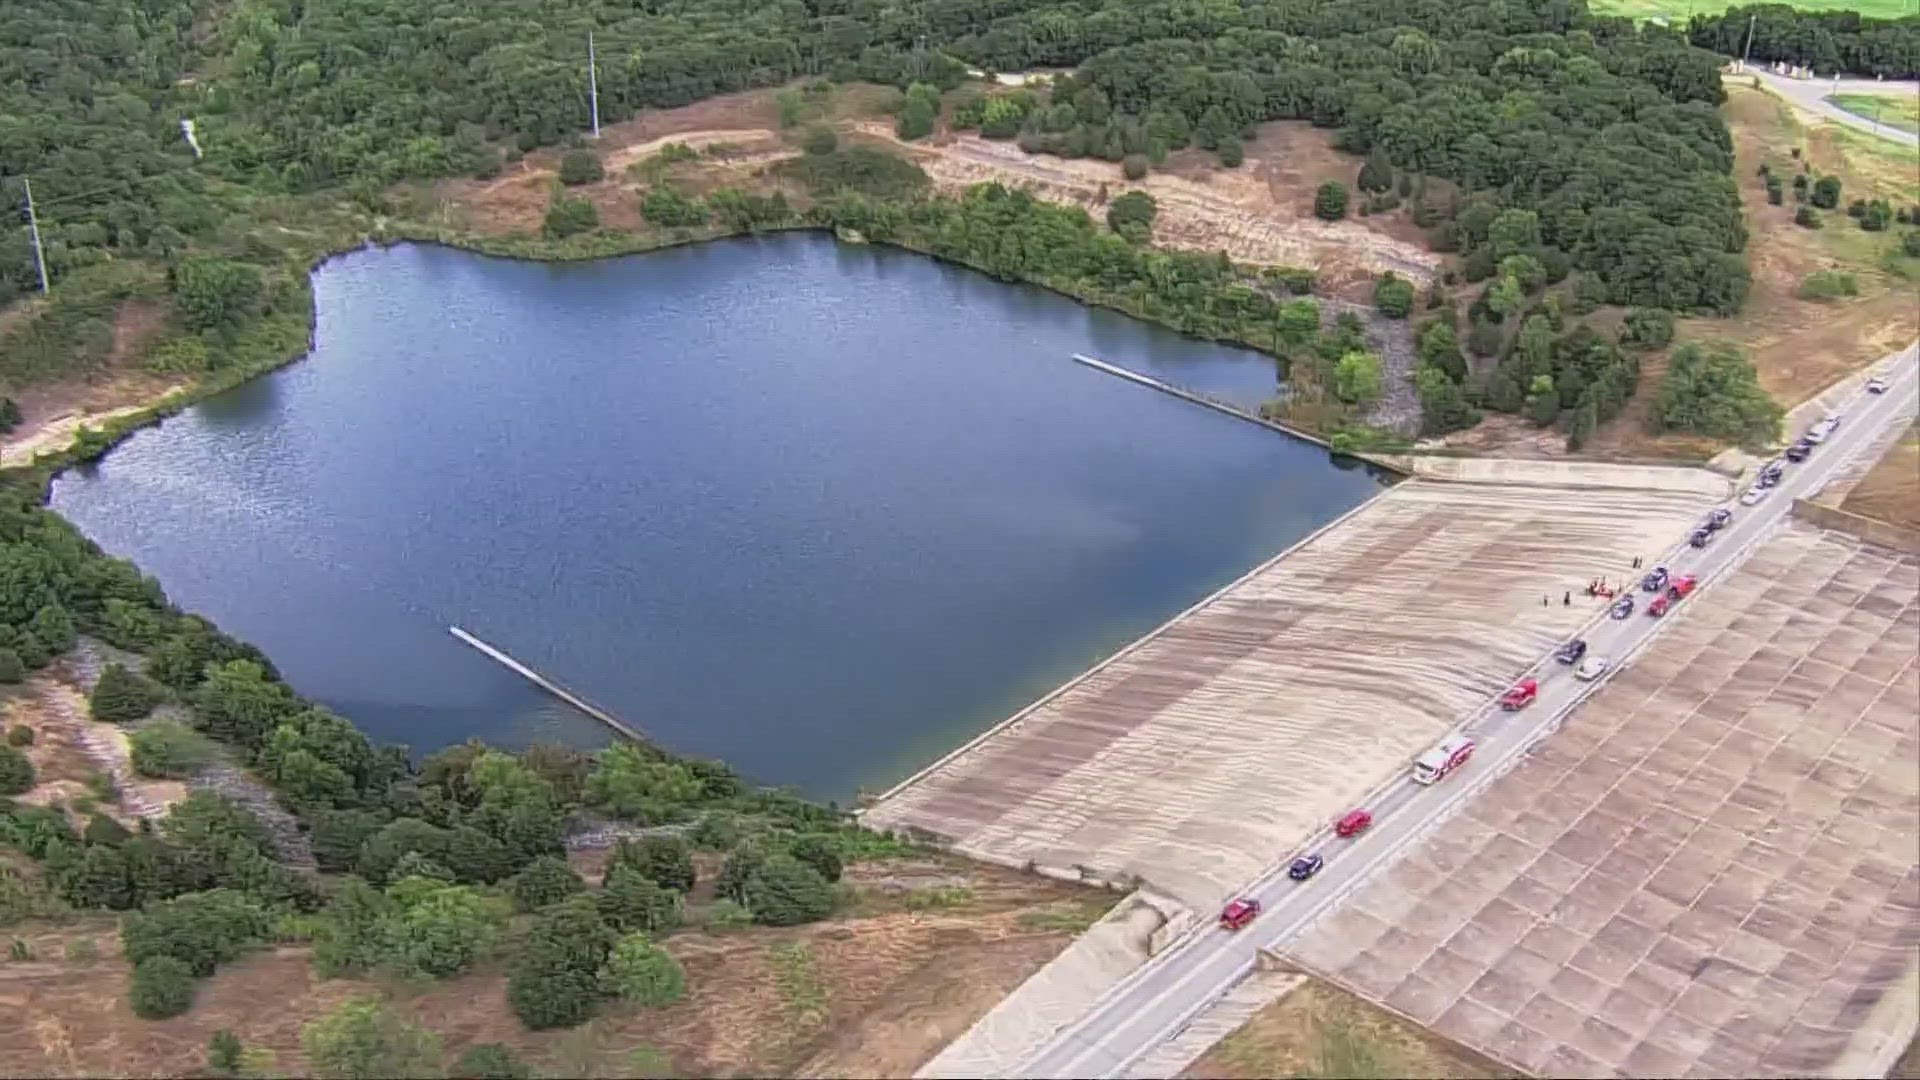 Police responded to Grapevine Lake on July 6 after a witness reported seeing a body near a spillway on the side of the dam.